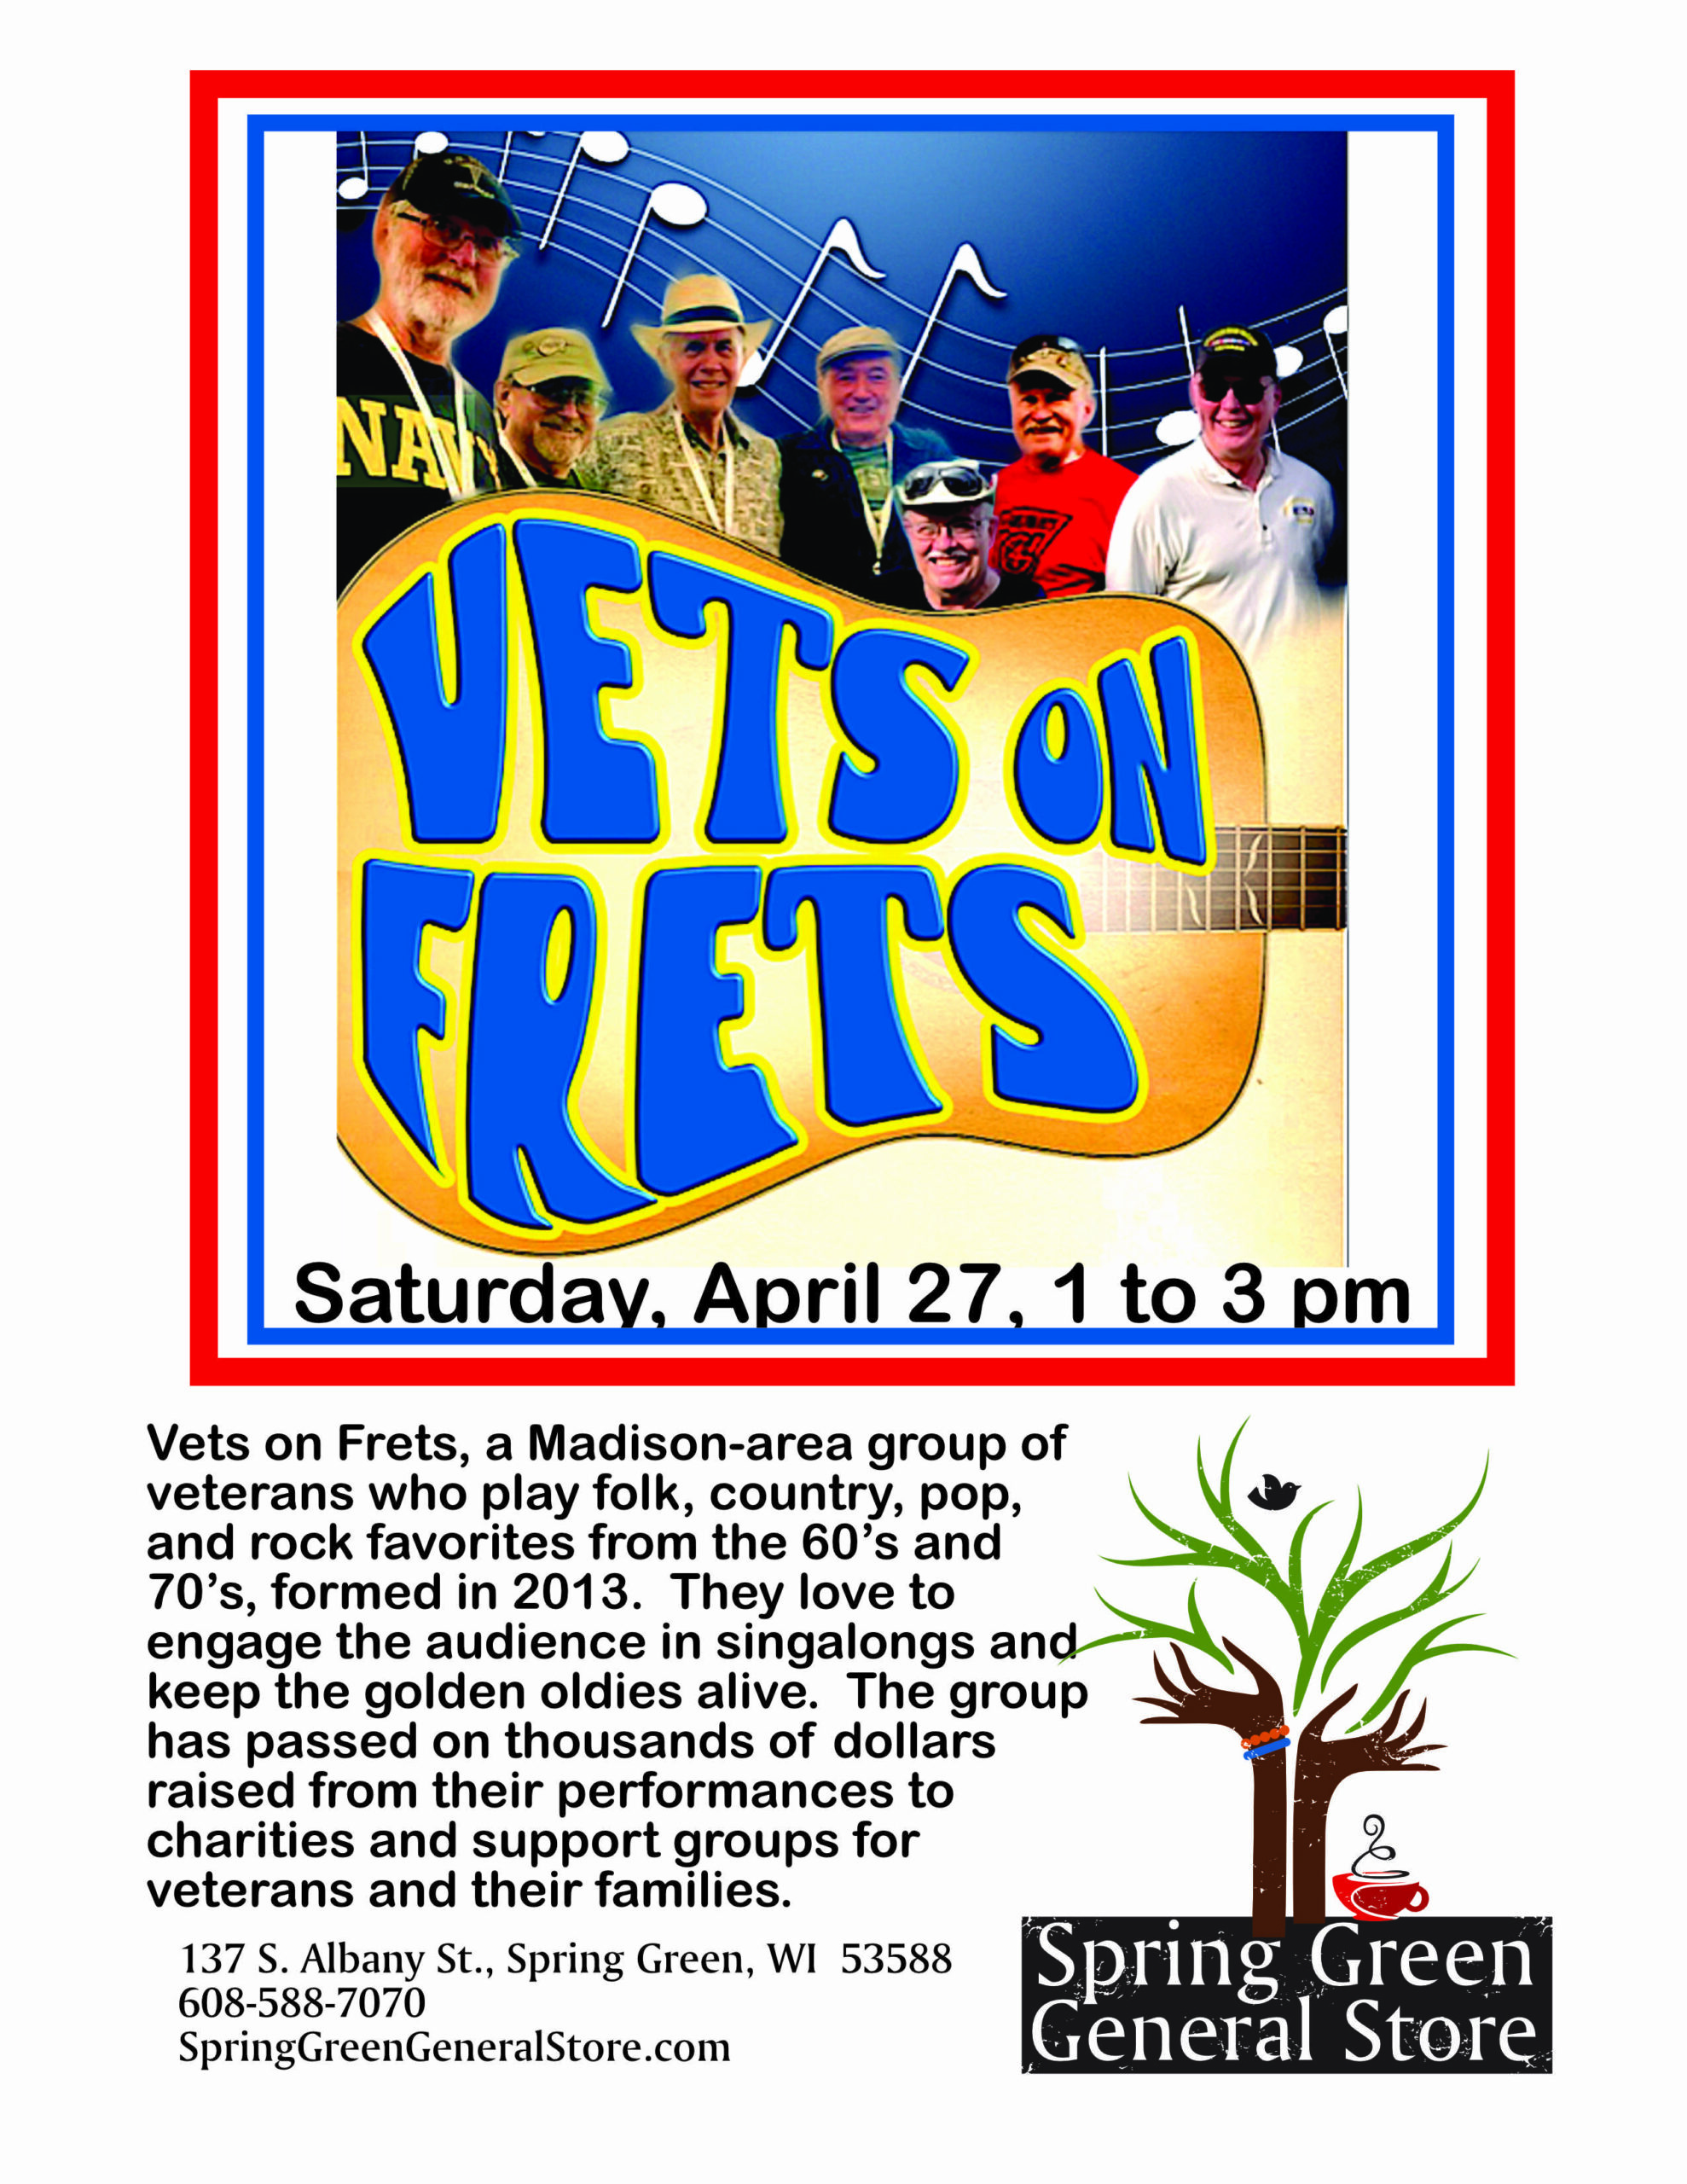 Vets on Frets music event flyer